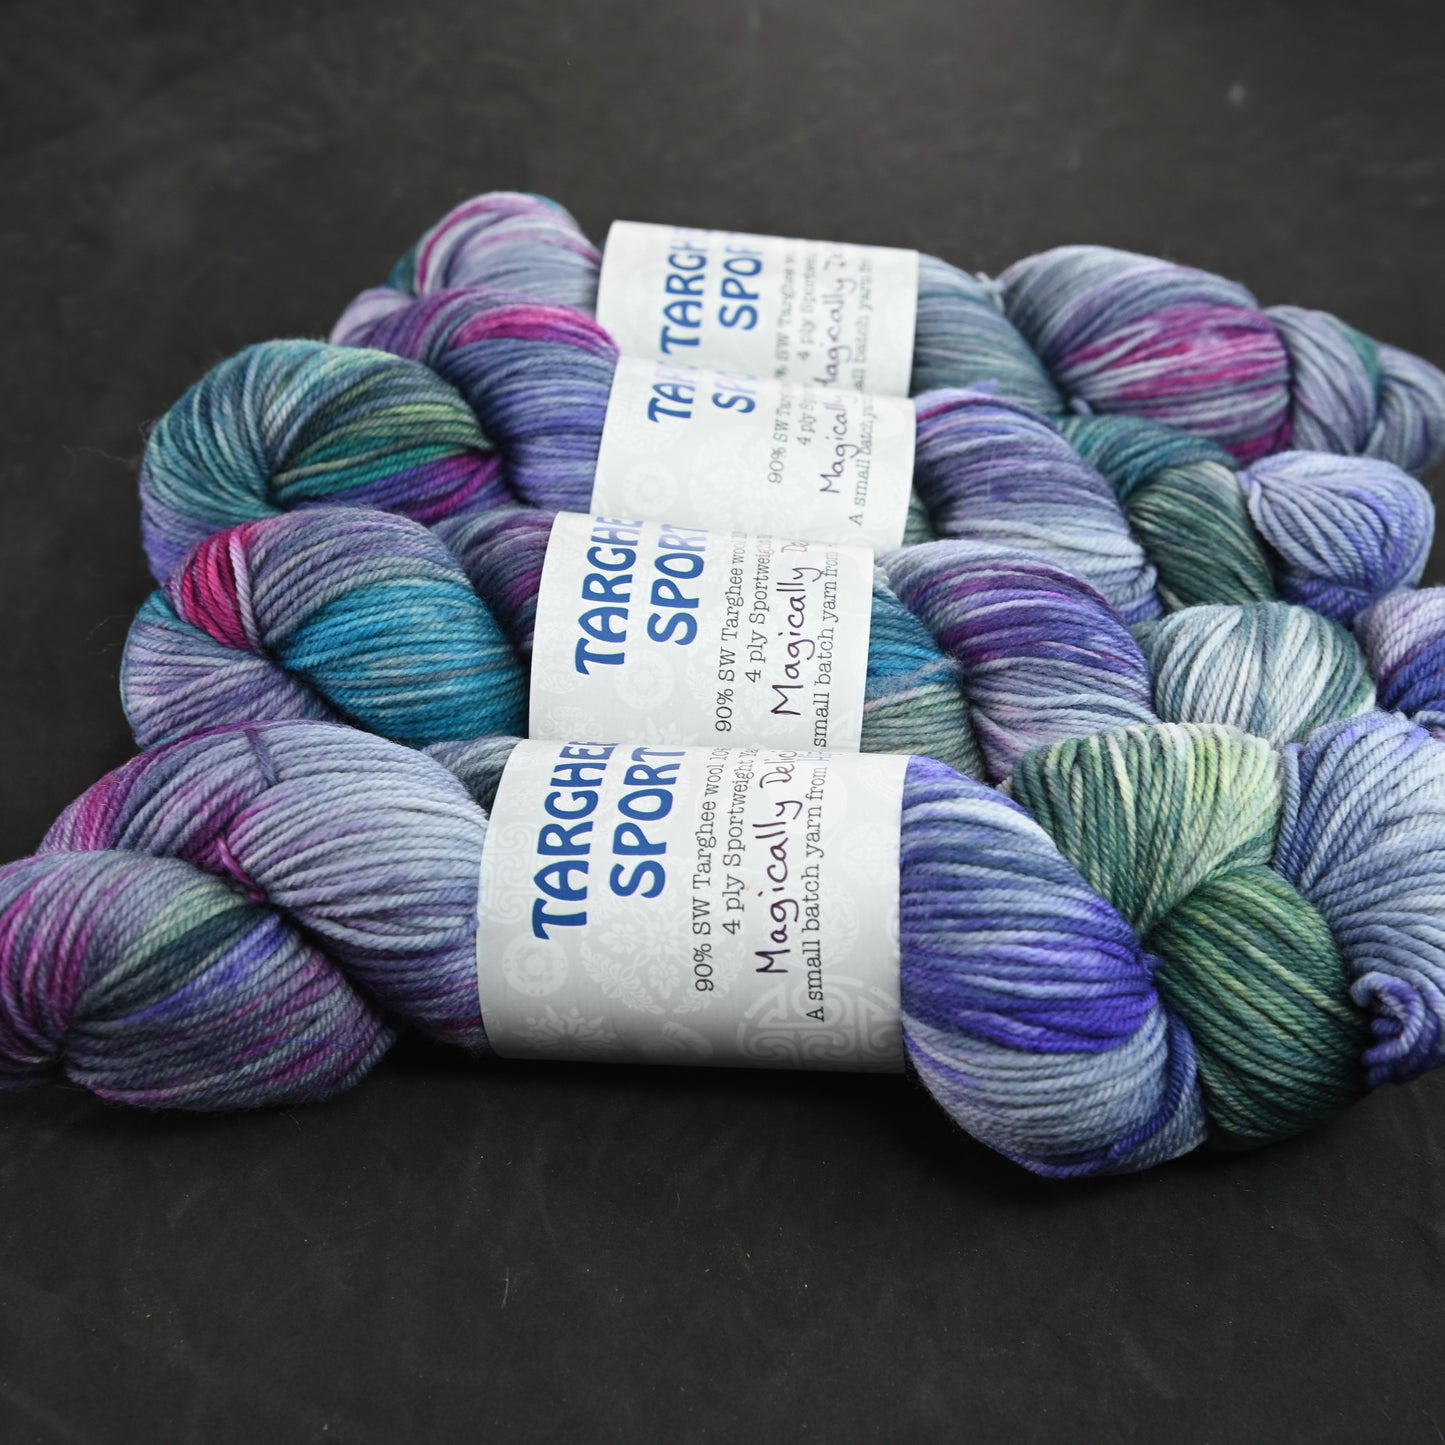 Magically Delicious on Hand Dyed SW Targhee Sport Yarn - 300 yd/100 g